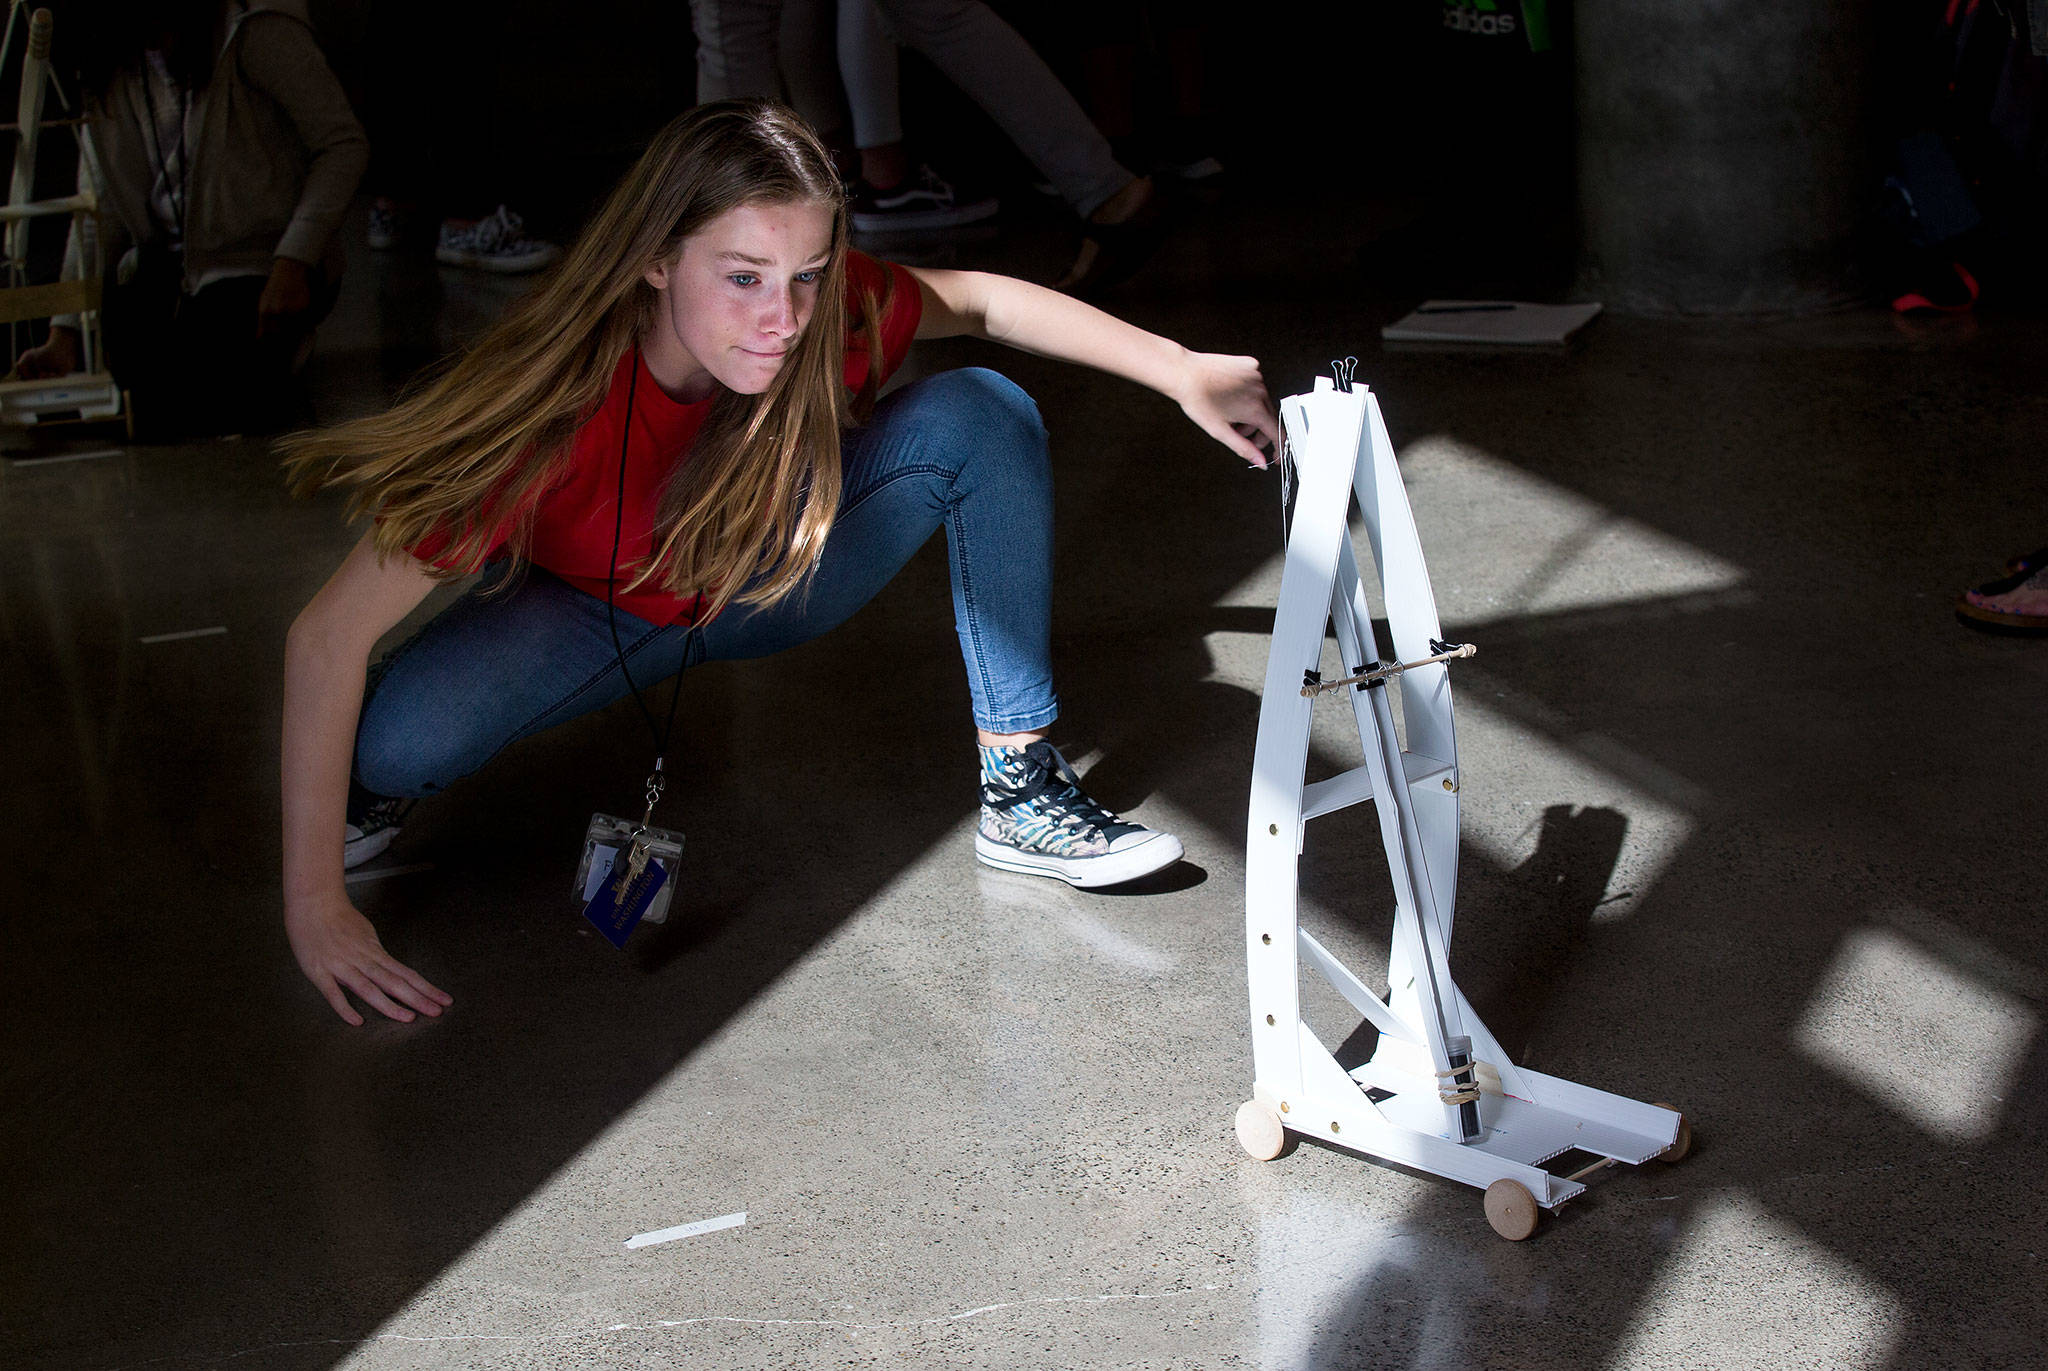 Fifth-grader Frankee Powers walks behind her team’s gravity car as it moves down a hallway at the University of Washington on Wednesday, Sept. 12, 2018 in Seattle, Wa. Students from Marshall Elementary in Marysville built gravity cars as part of a one week engineering program. (Andy Bronson / The Herald)